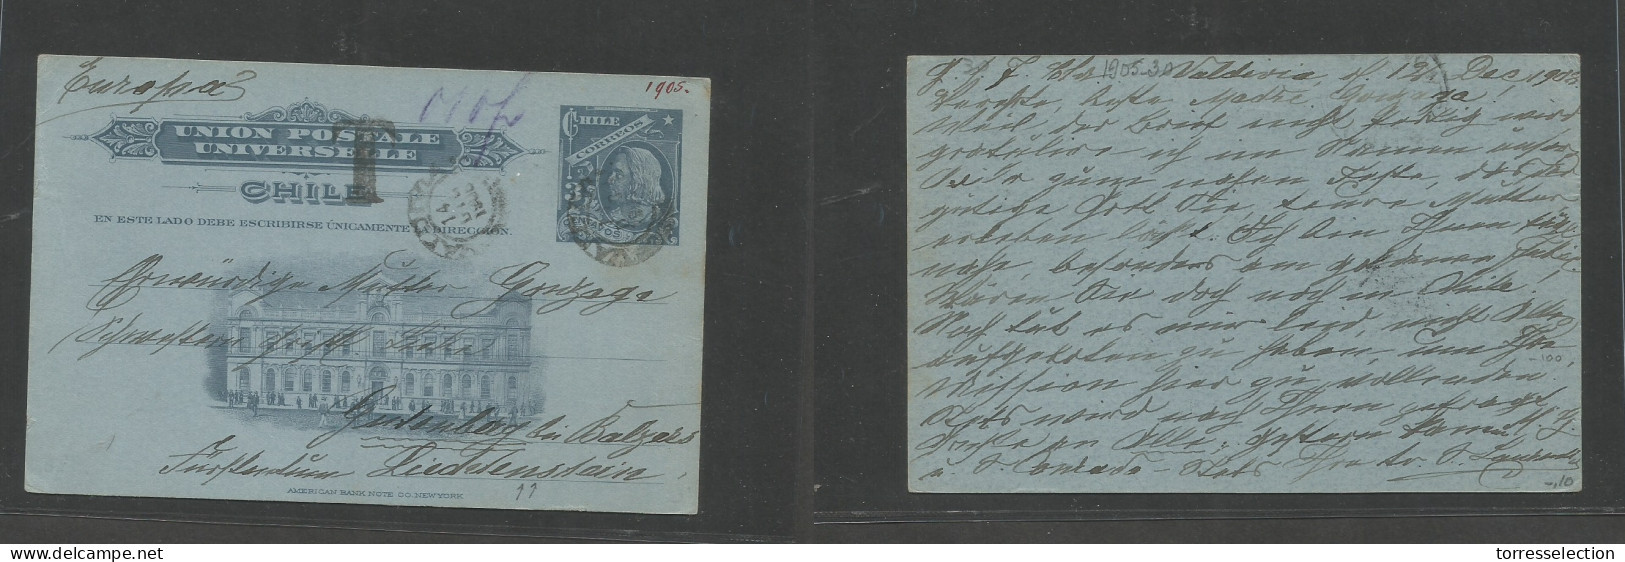 CHILE - Stationery. 1908 (14 Dec) Valdivia - LIECHESTEIN, Gudensberg. 3c Grey Illustrated Stat Card + Taxed "T" + Cash P - Cile